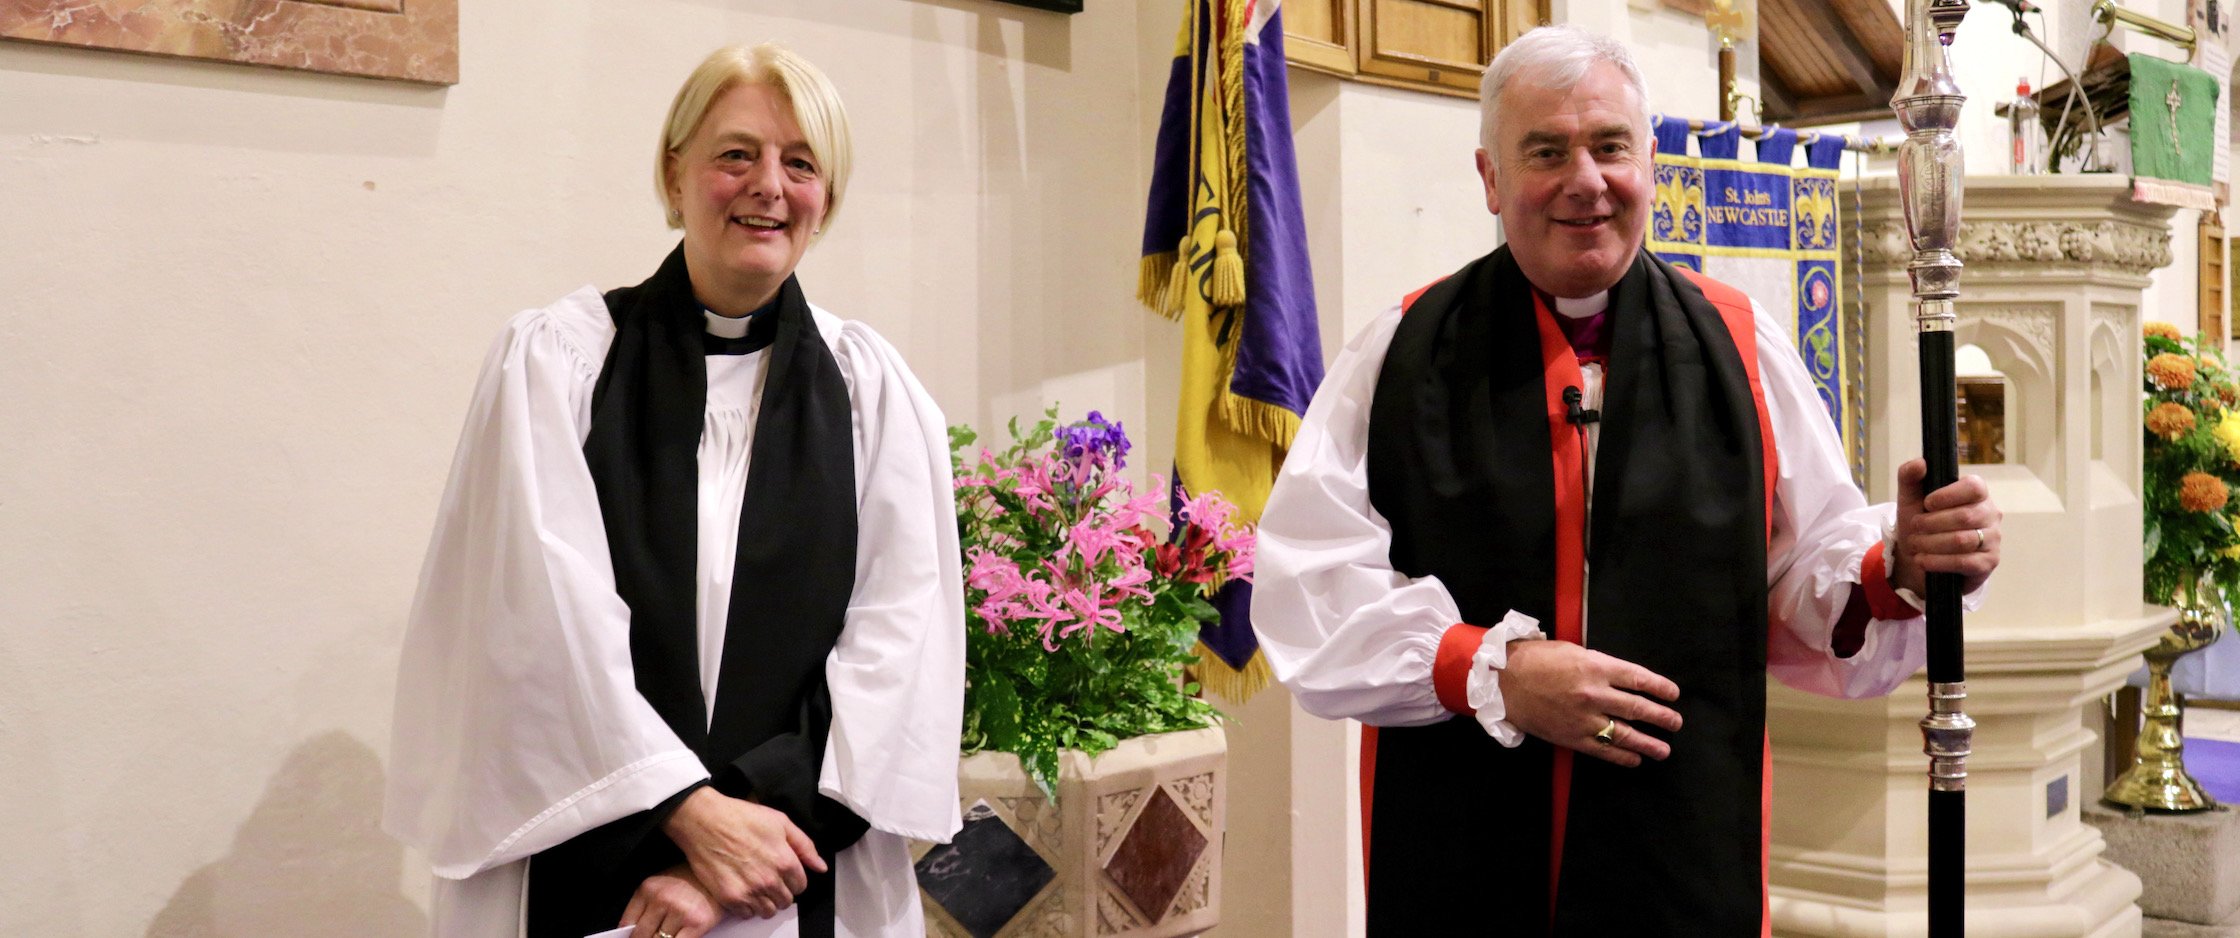 The Revd Myrtle Morrison with Bishop David McClay.